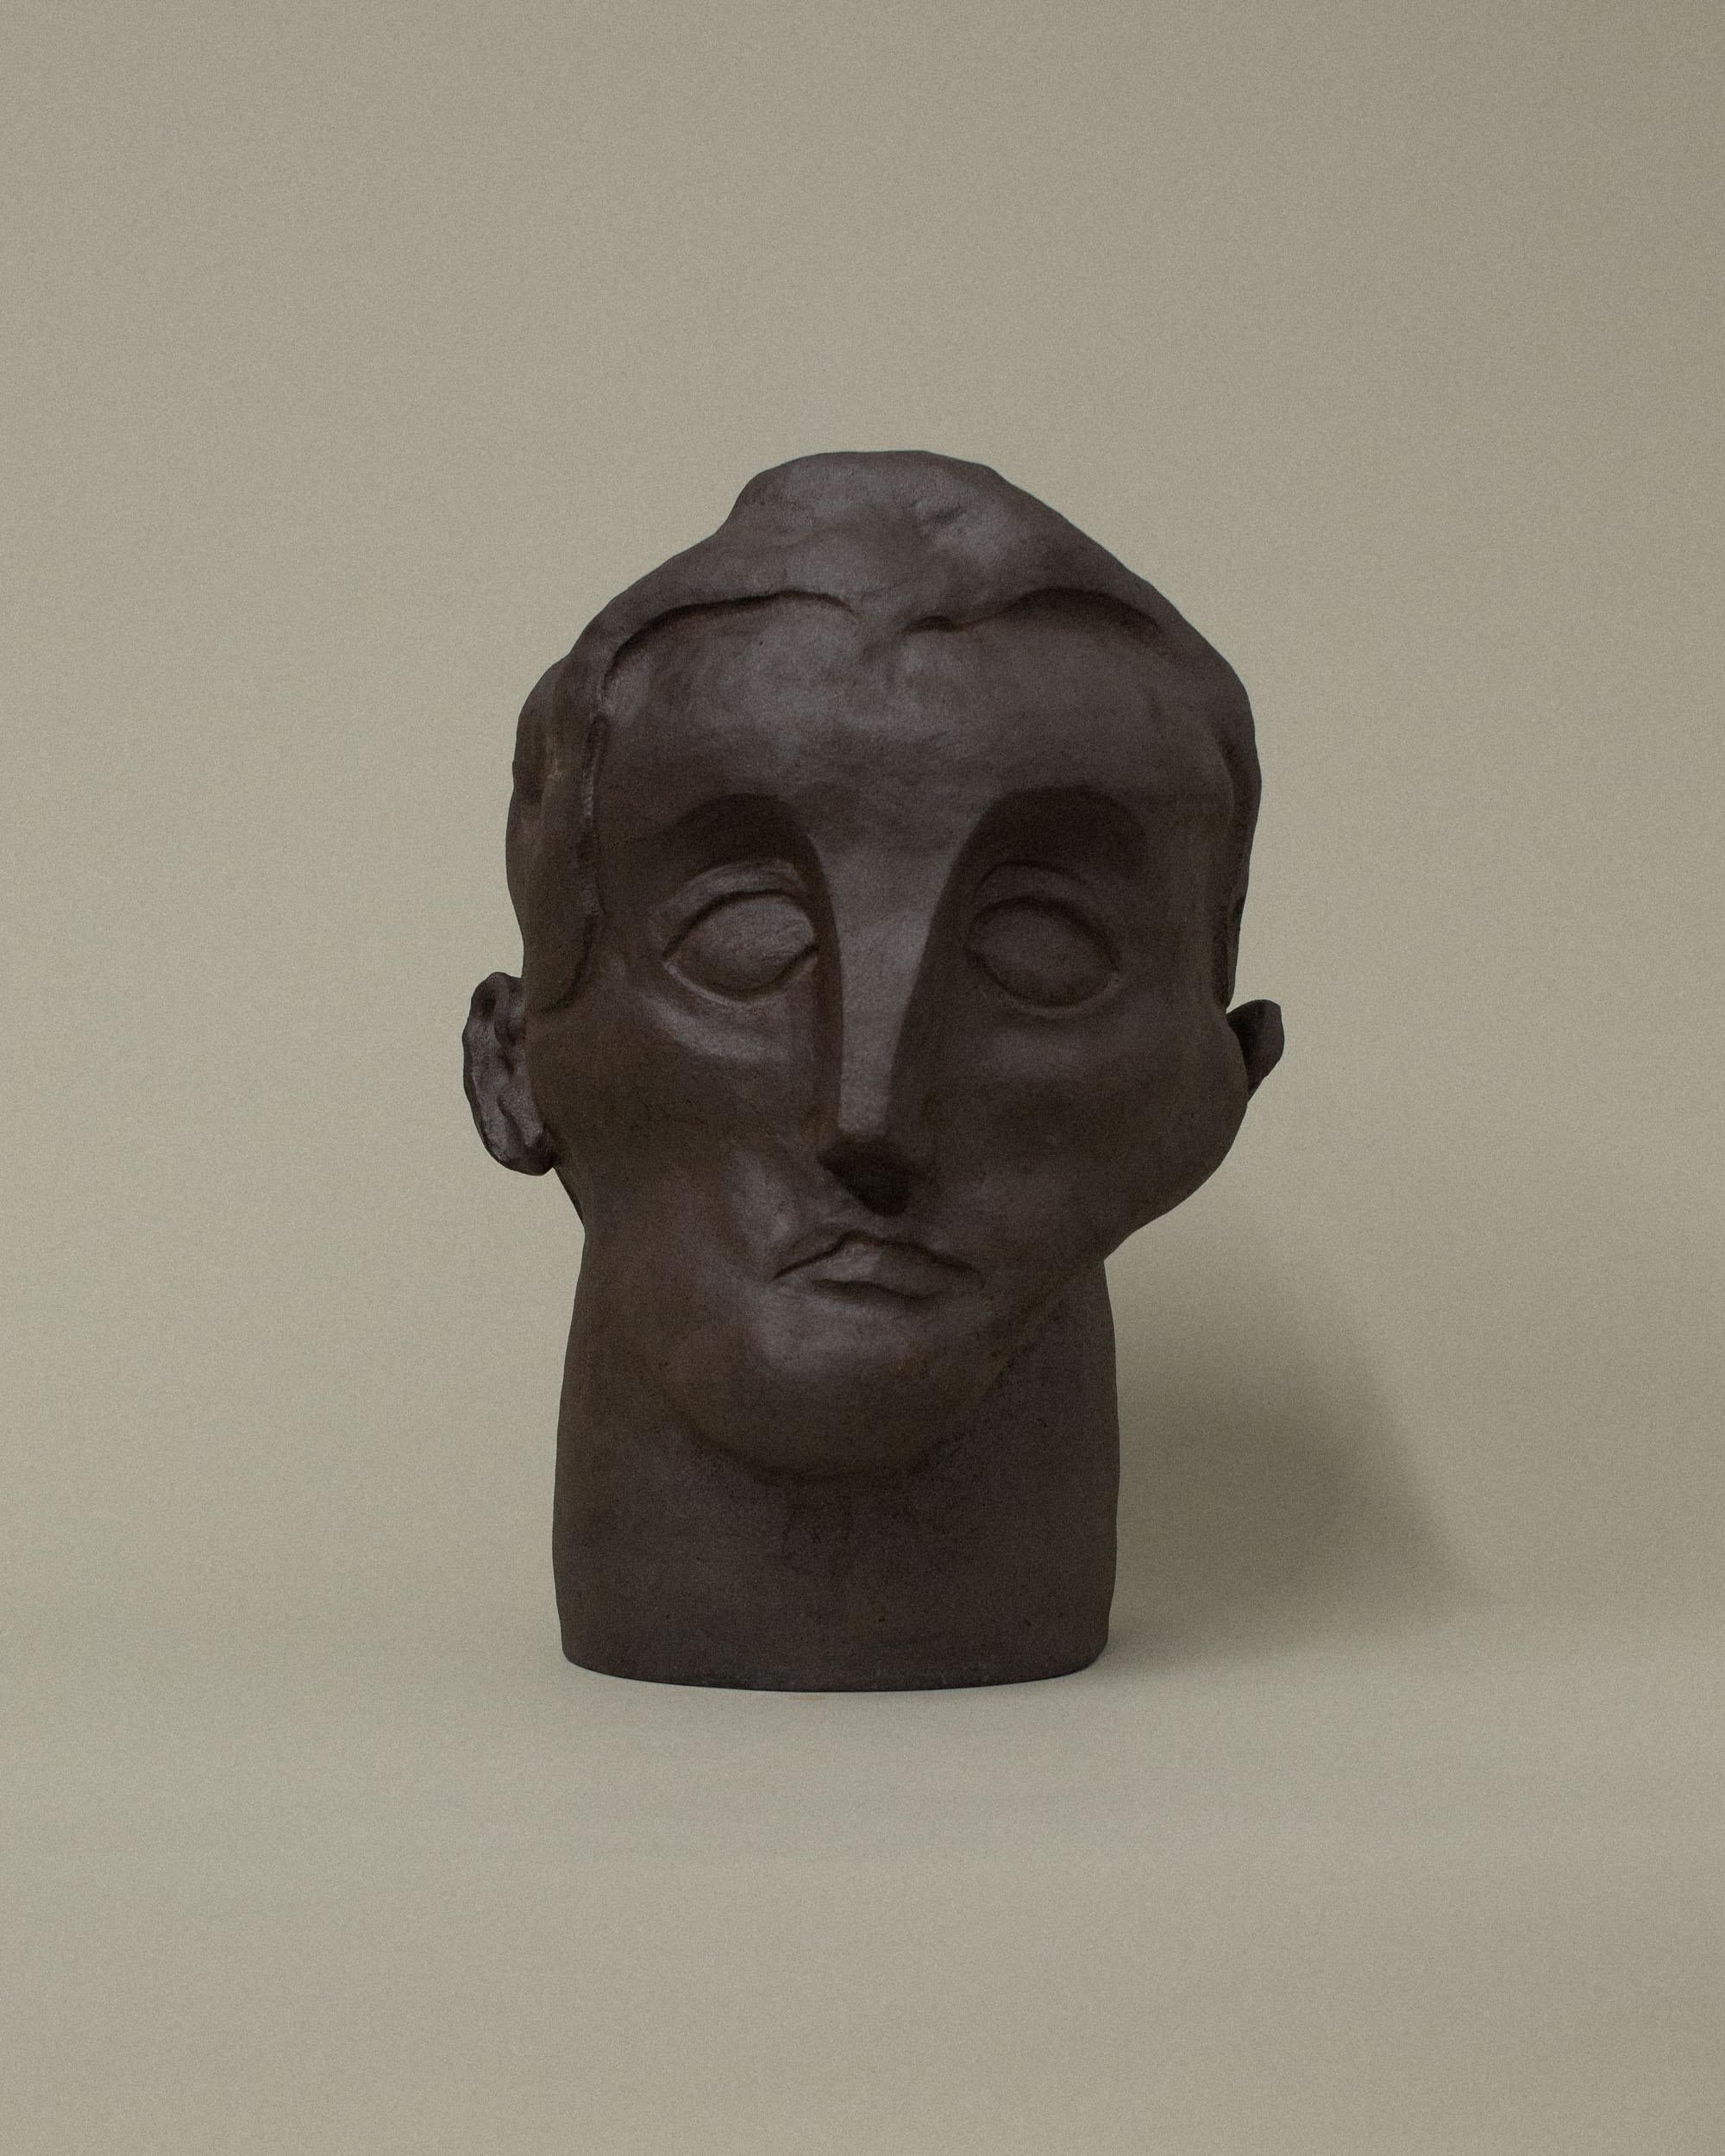 Dark Brown Monumental Head Sculpture by Common Body
Dimensions: ⌀ 33 x H 44 cm
Materials: Dark Brown Stoneware

Common body is a sculpture and interior object studio founded by nathaniel kyung smith, an artist whose passion lies in the intersection